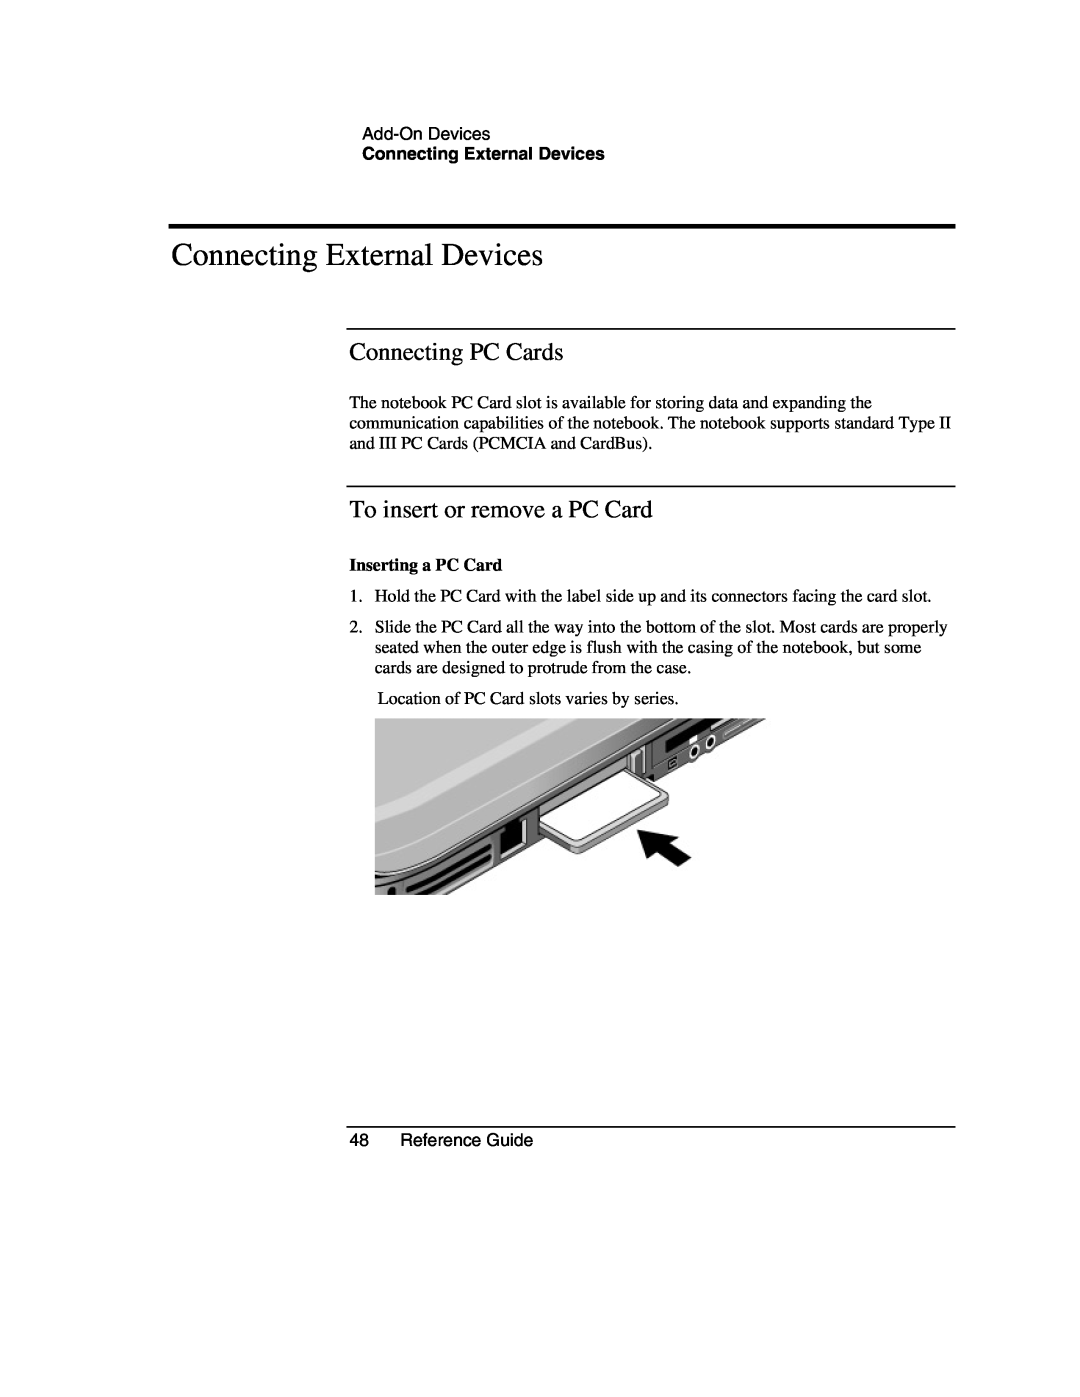 HP 2171EA, 2186AF Connecting External Devices, Connecting PC Cards, To insert or remove a PC Card, Inserting a PC Card 